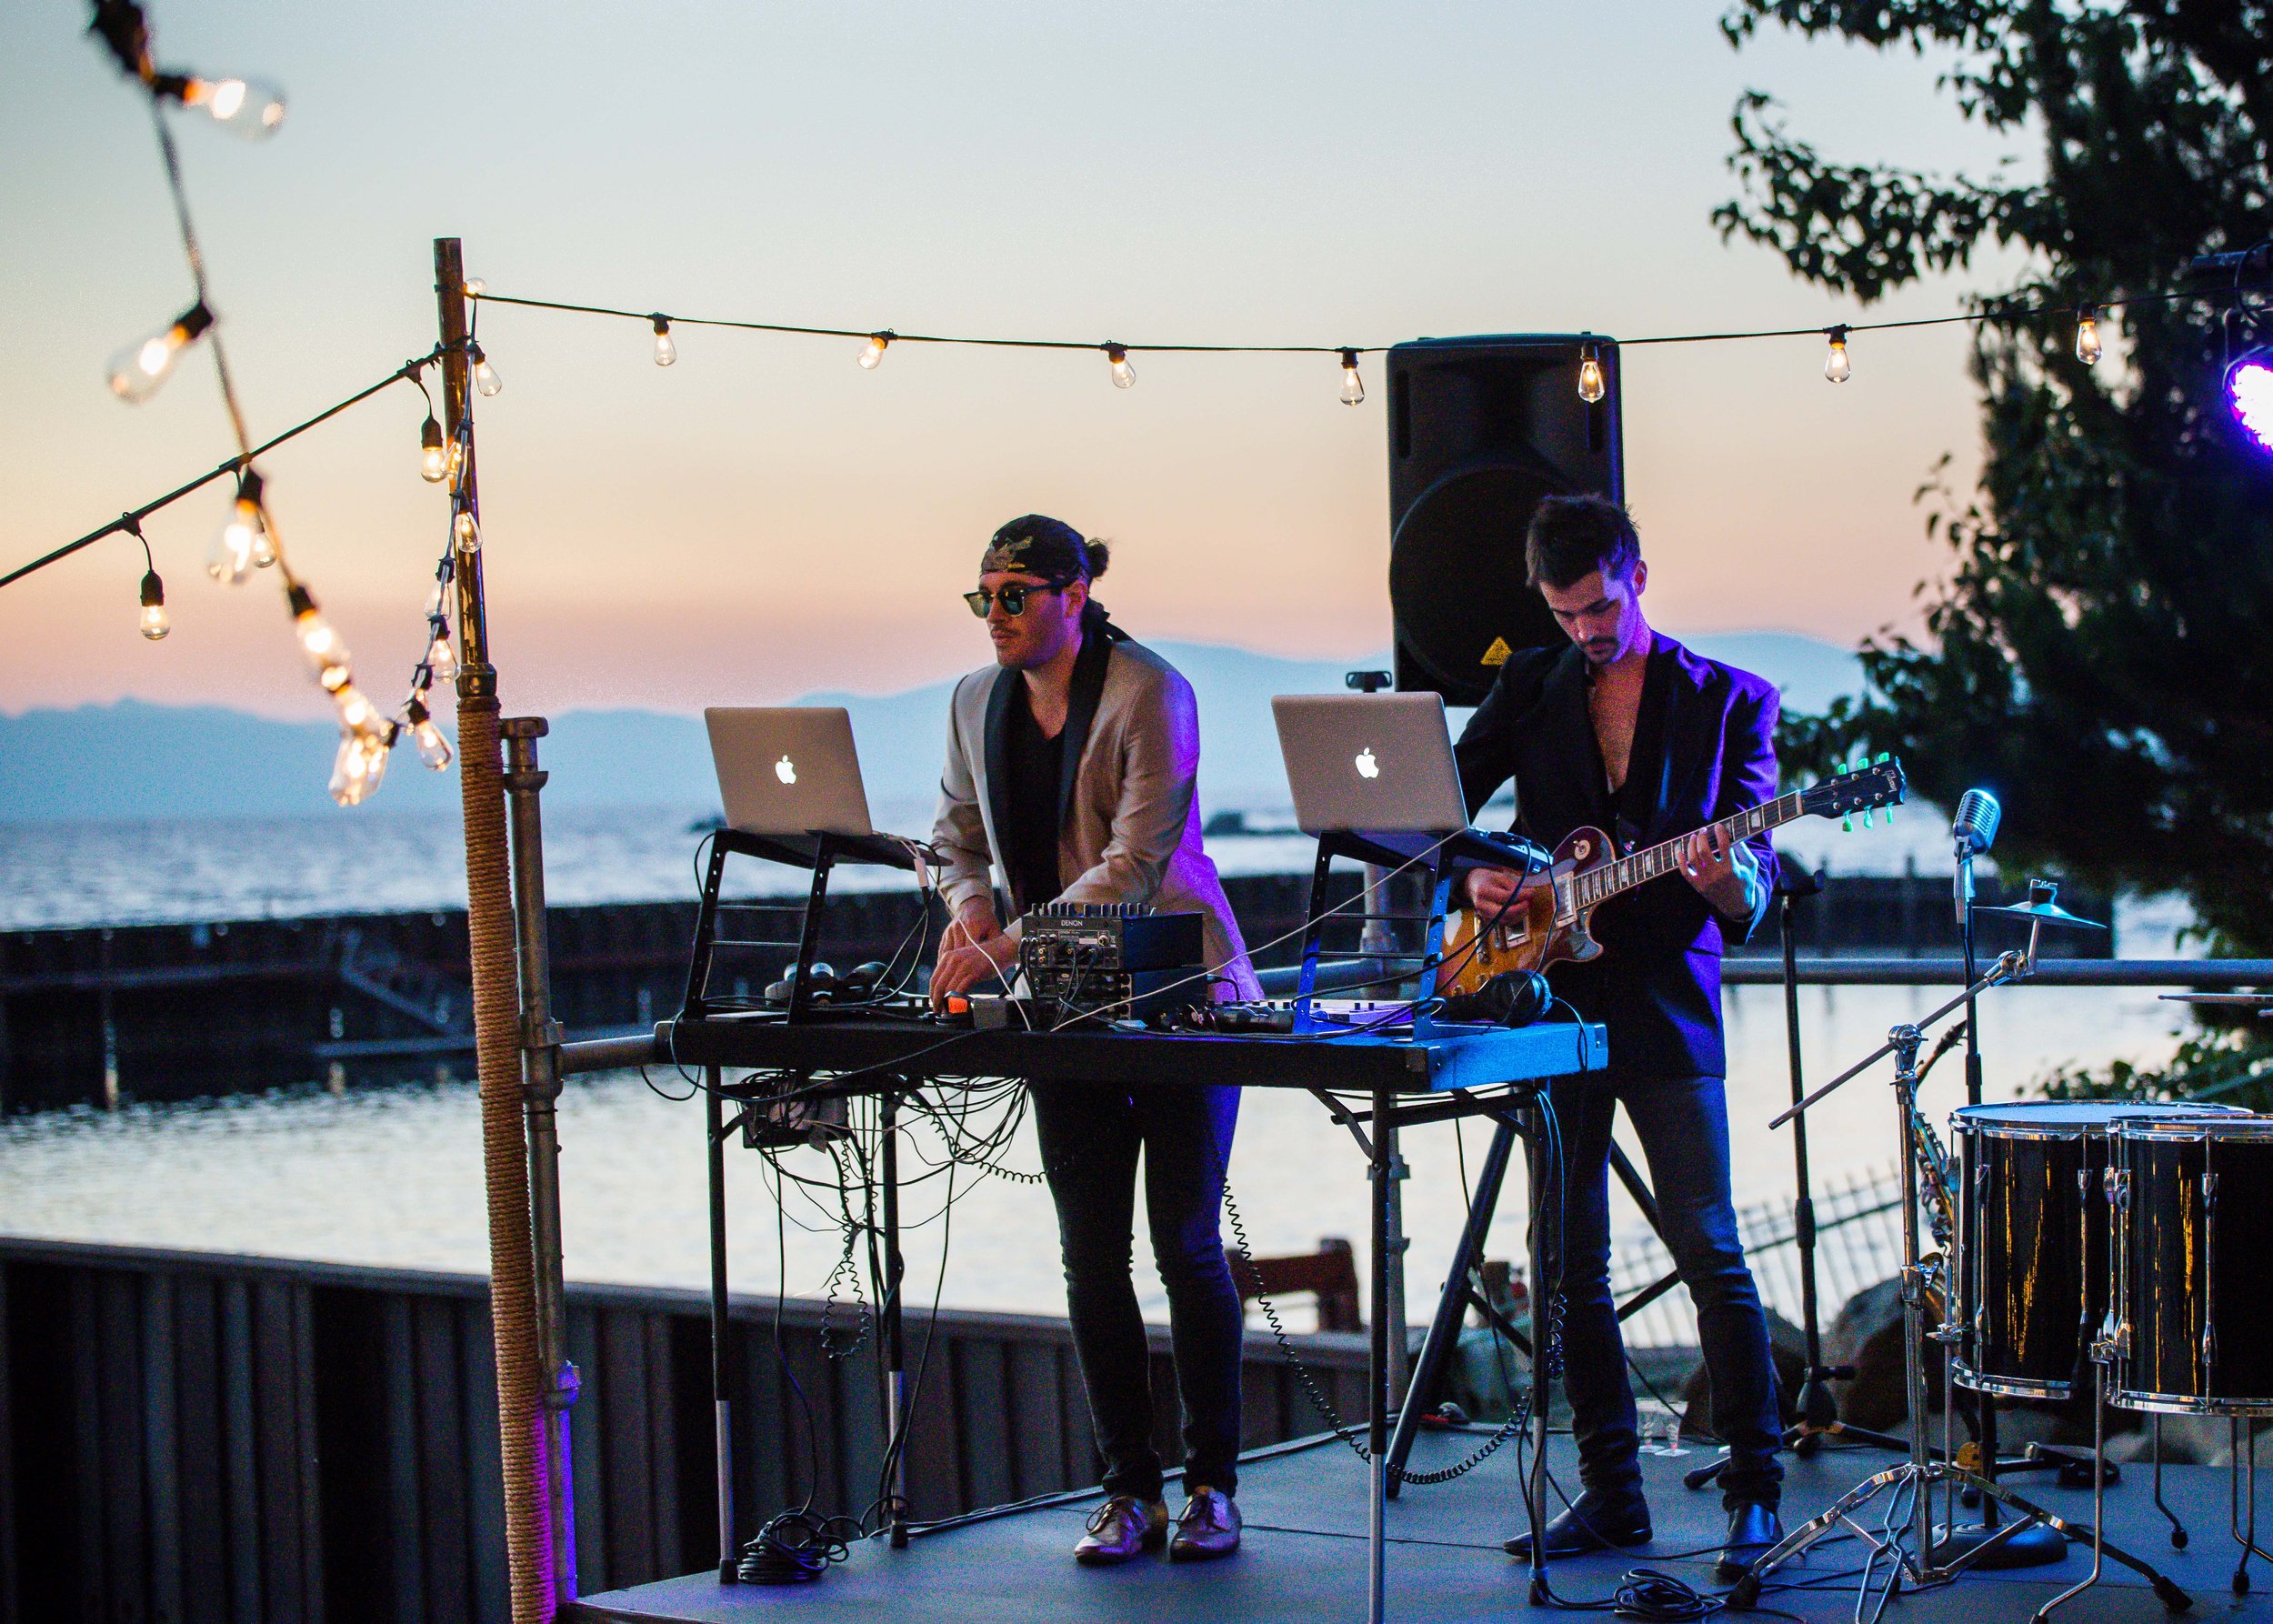 Soulcirque is a DJ Hybrid Band that blends DJ'ing with live instruments. Great for private parties, corporate events, and weddings. Options include Drums, Saxophone, Violin, Guitar.